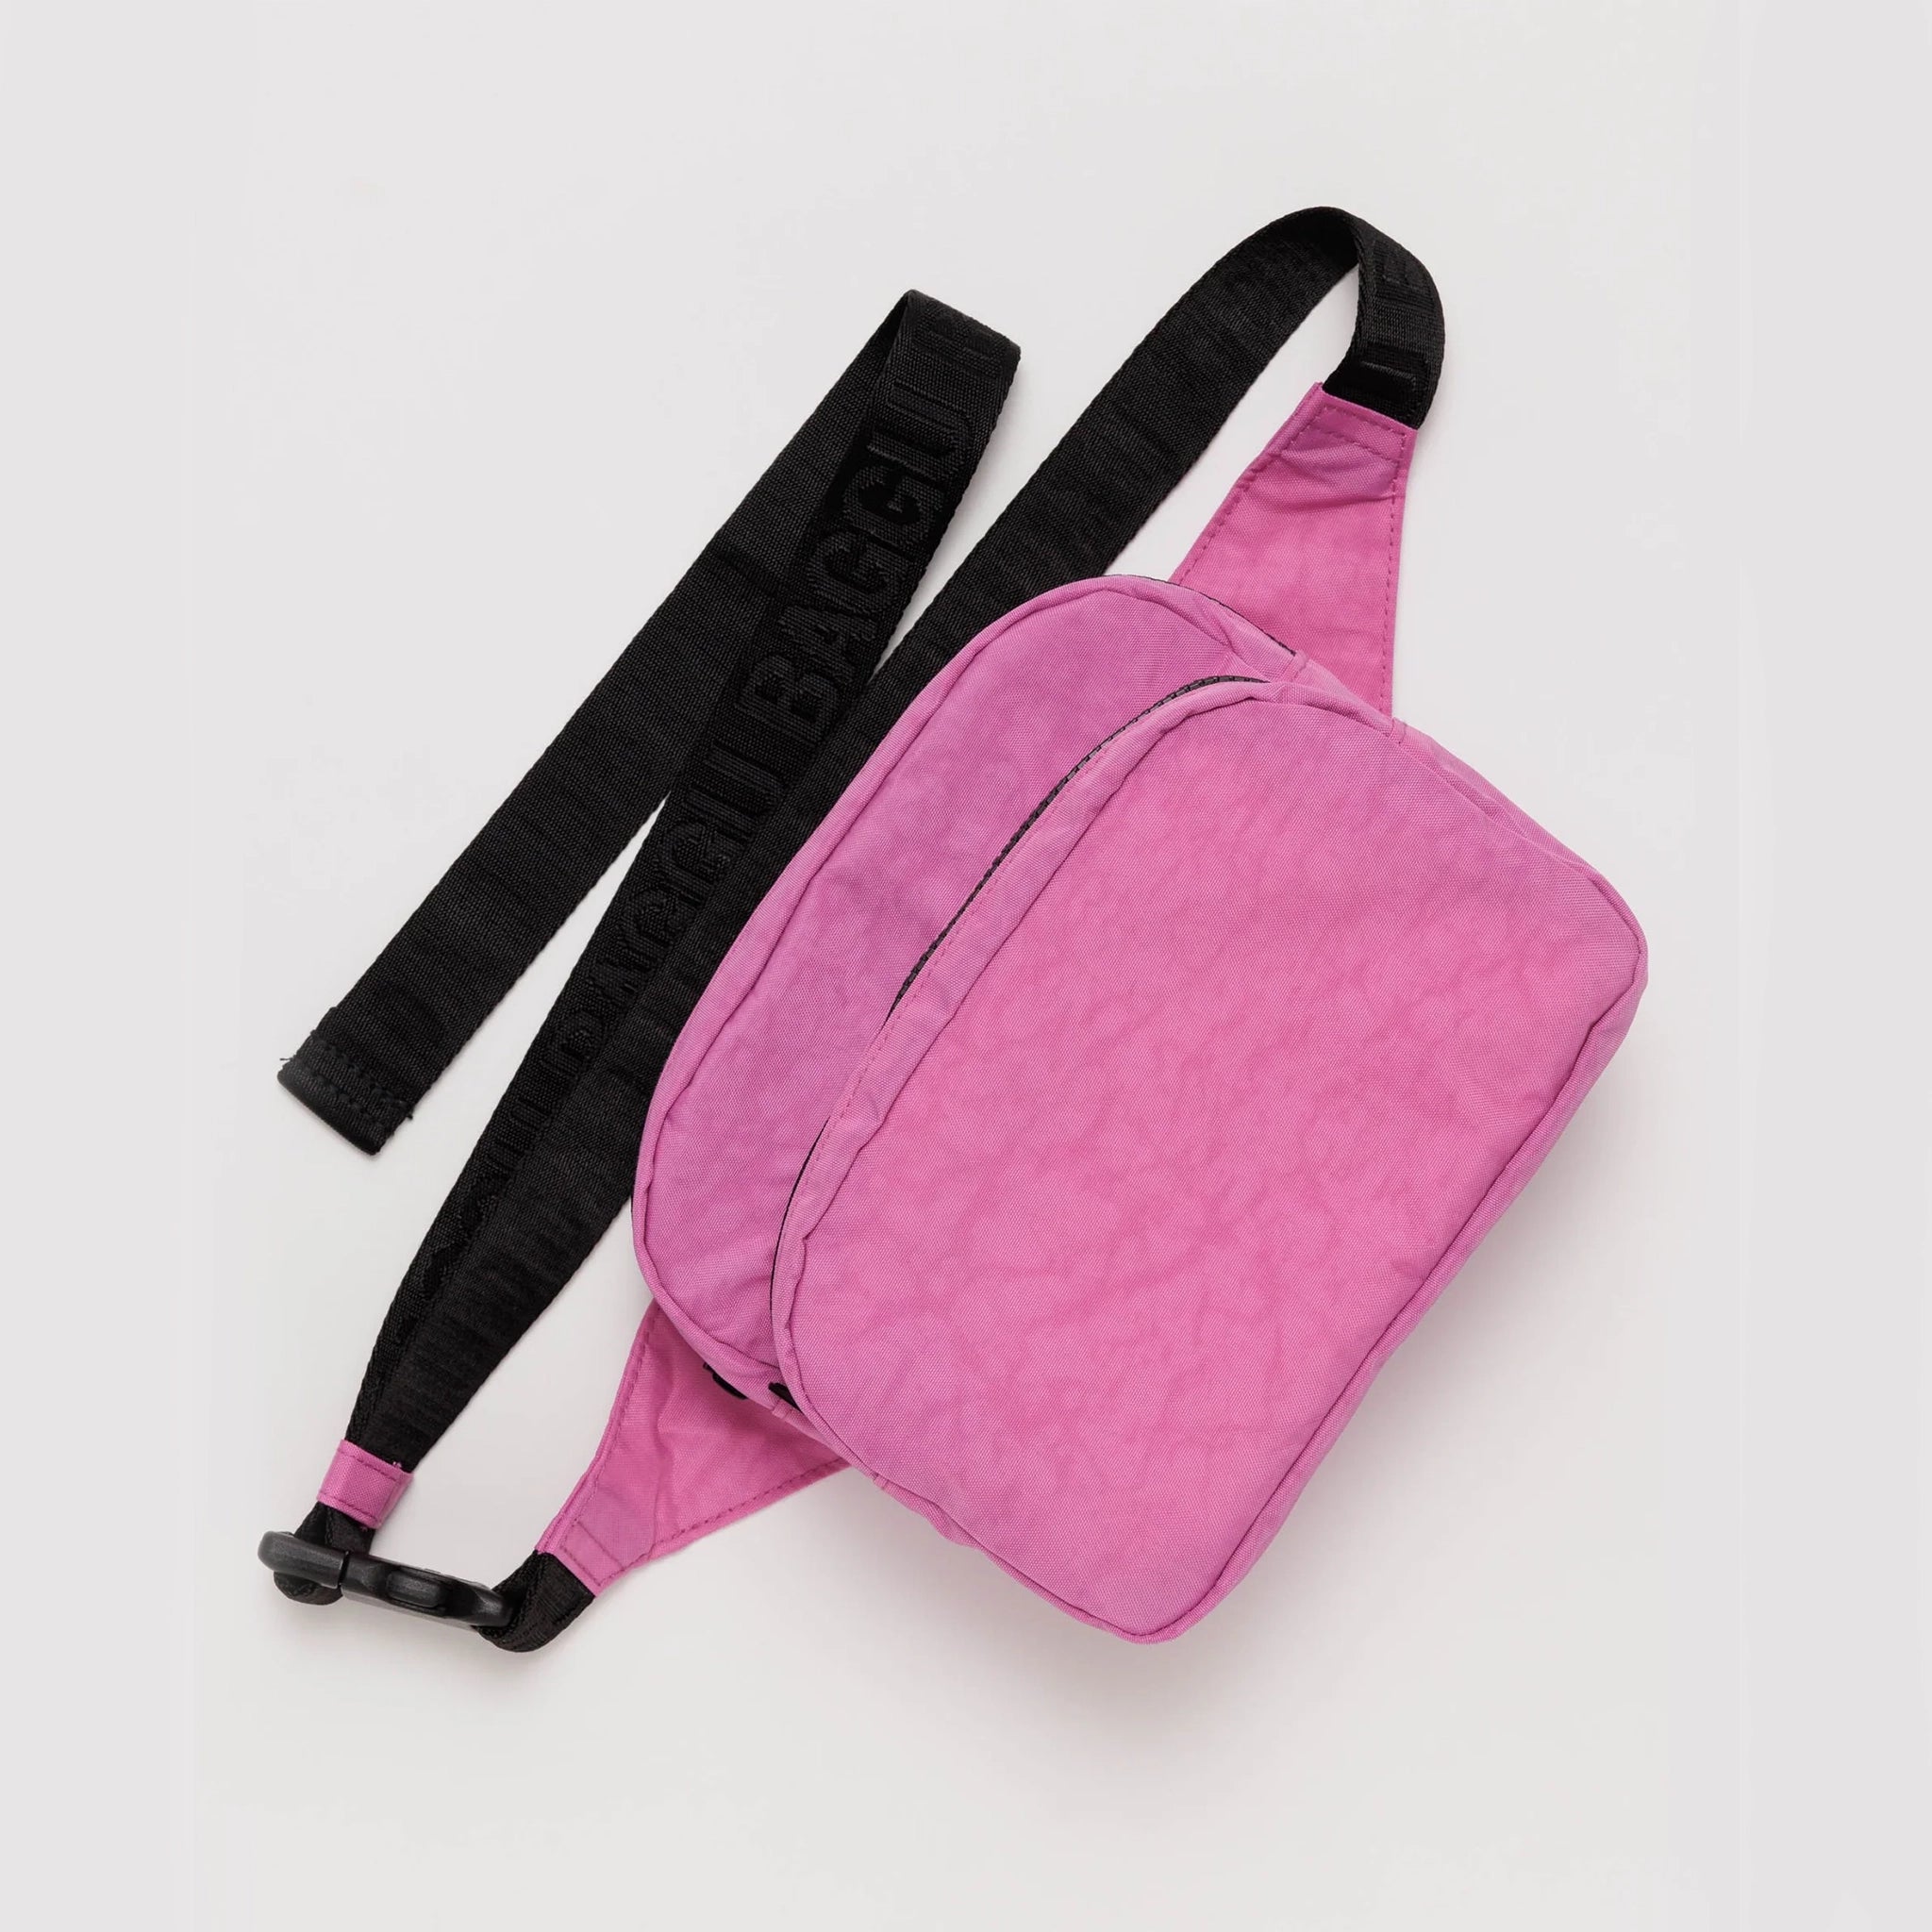 On a white background is a bright pink fanny pack with a black strap. 